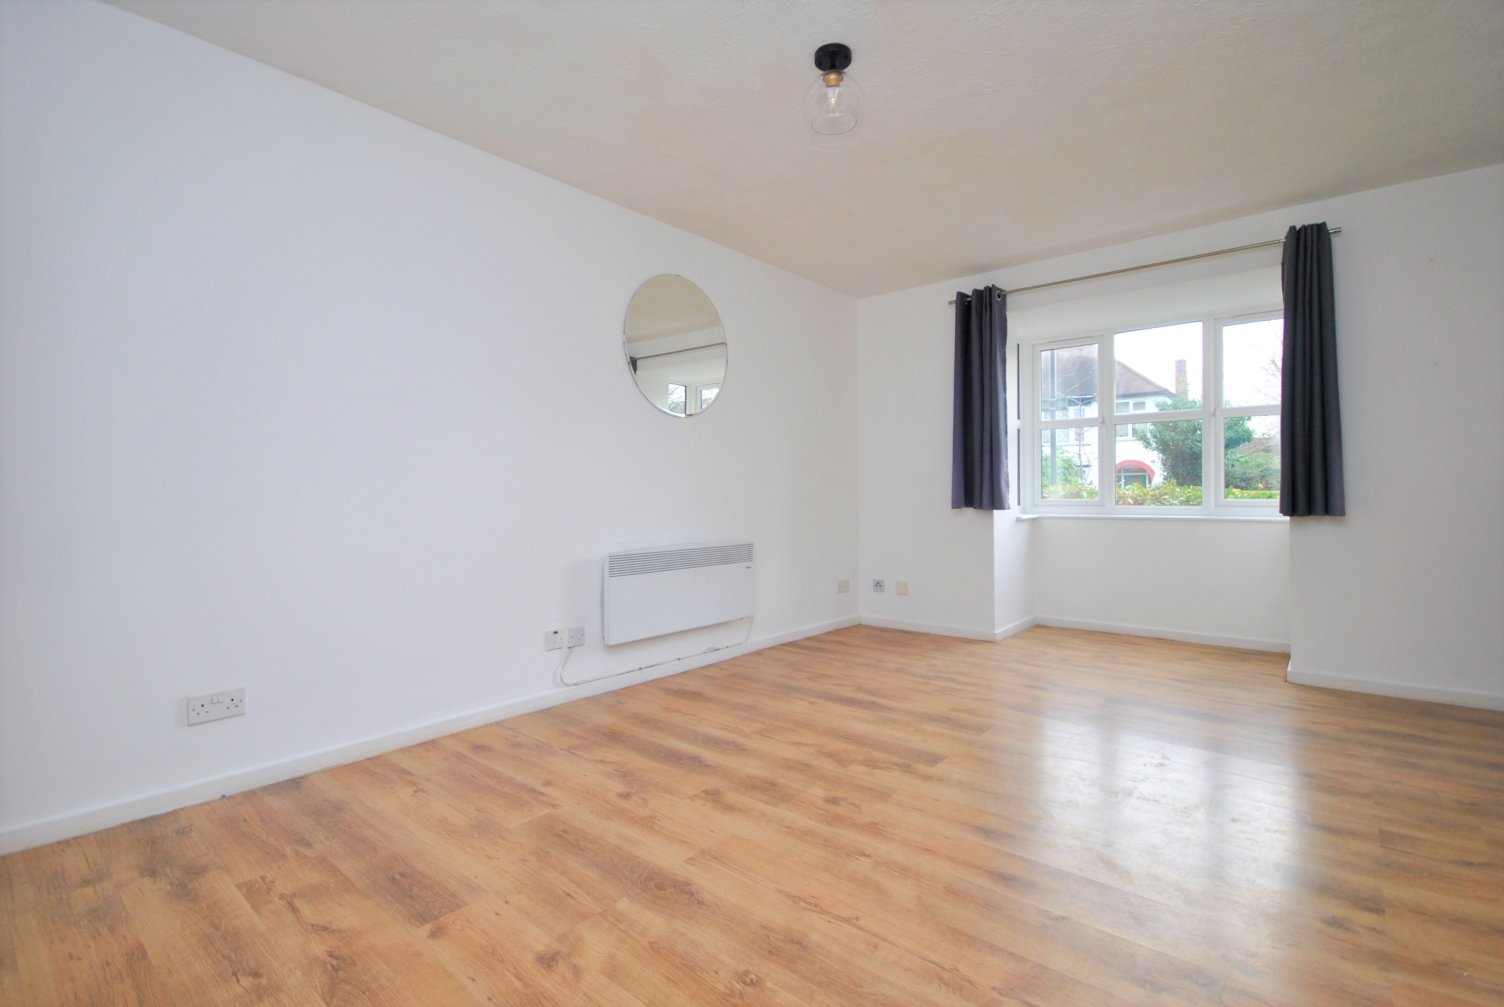 Flat to rent - Le May Avenue, London, SE12